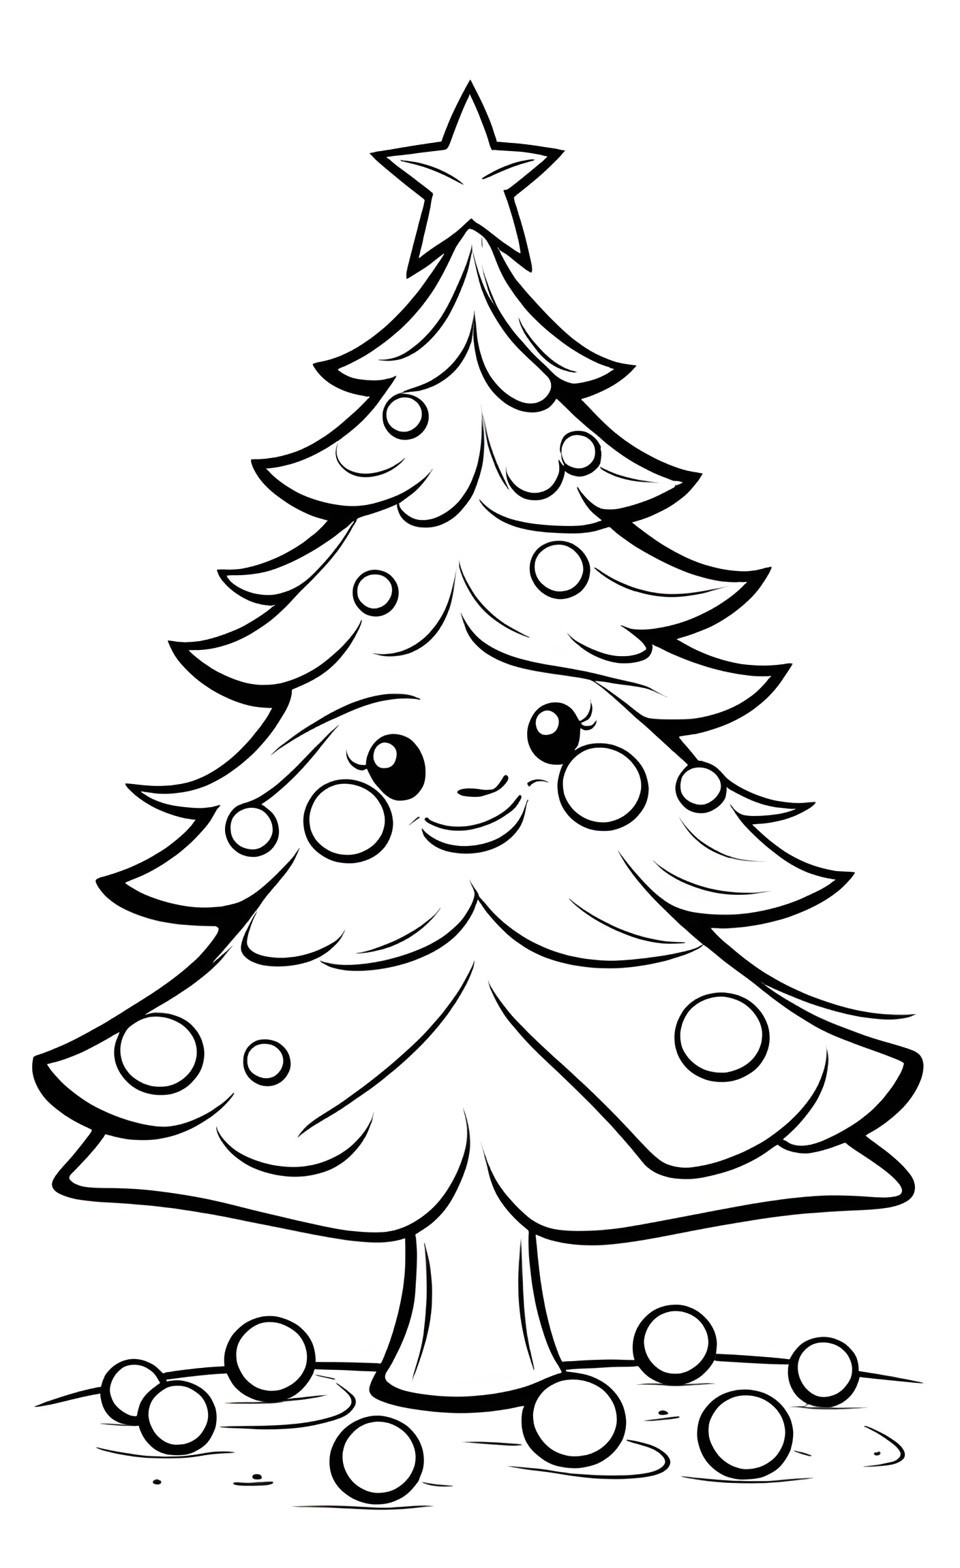 Simple Christmas Tree coloring pages for kids